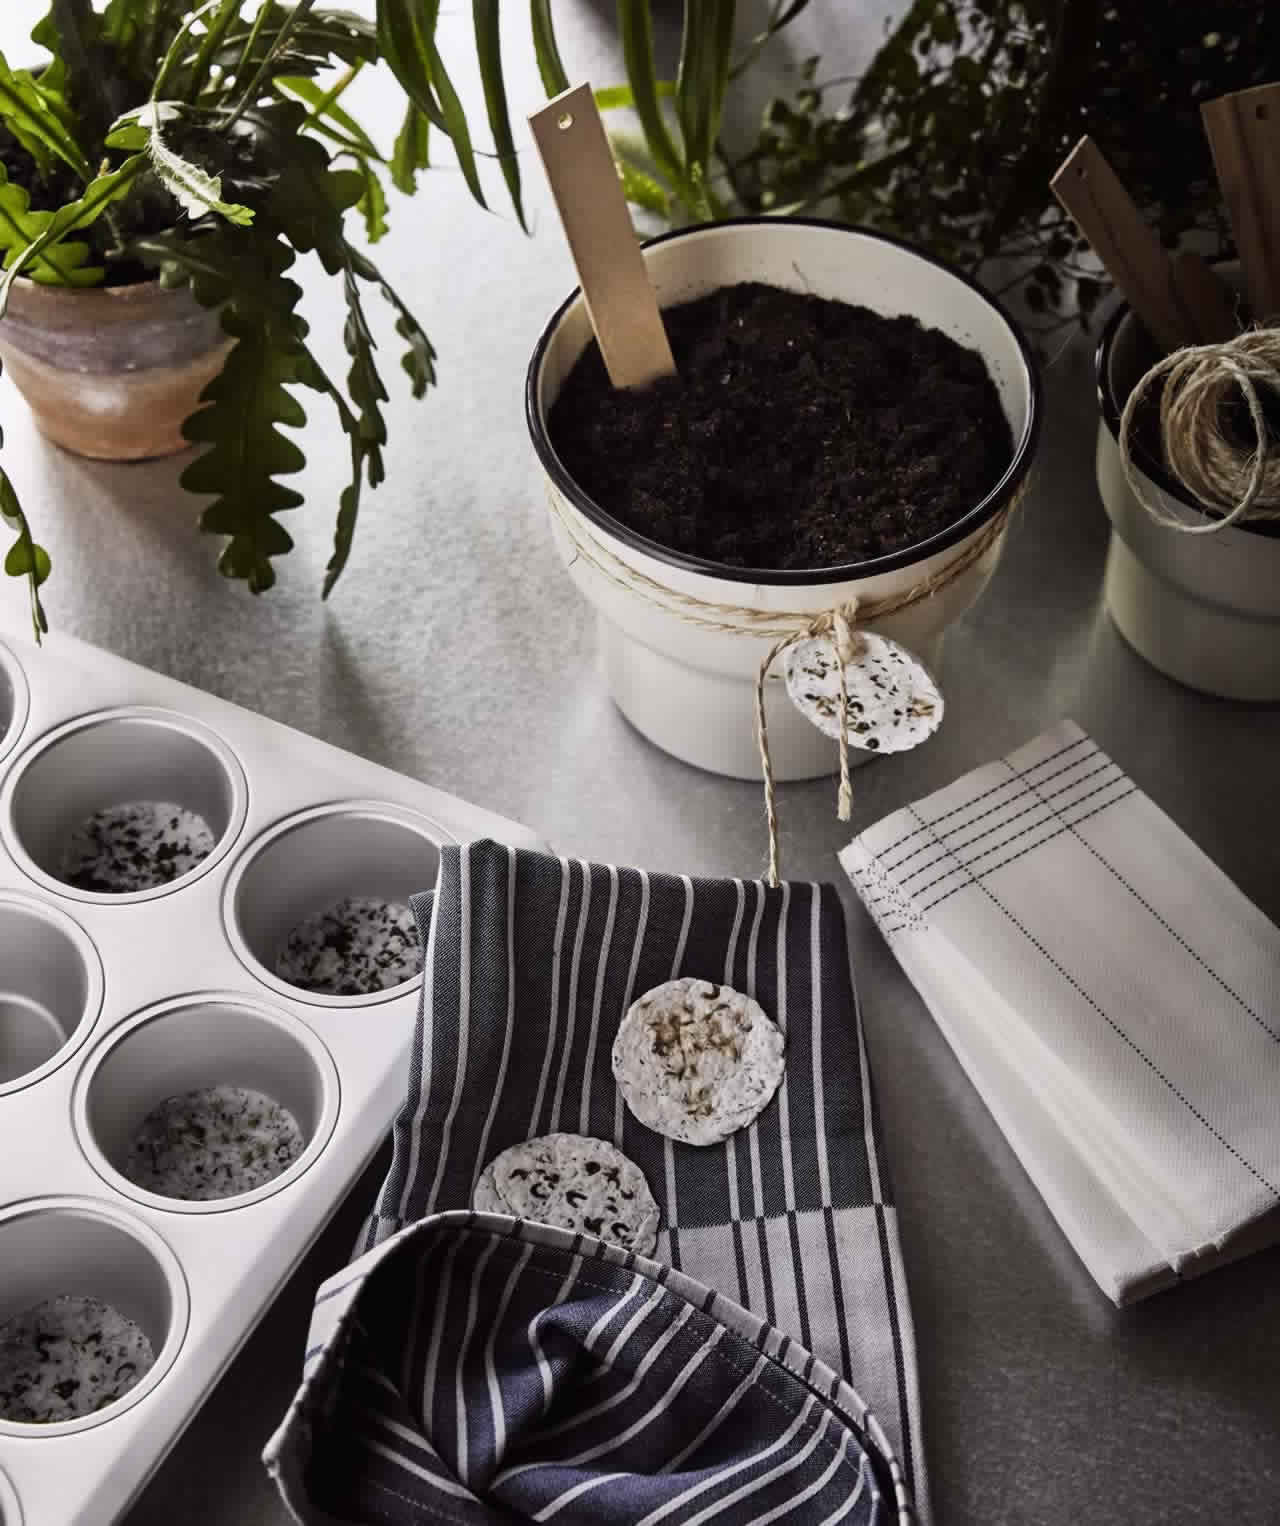 IKEA-The good effects of growing plants 4